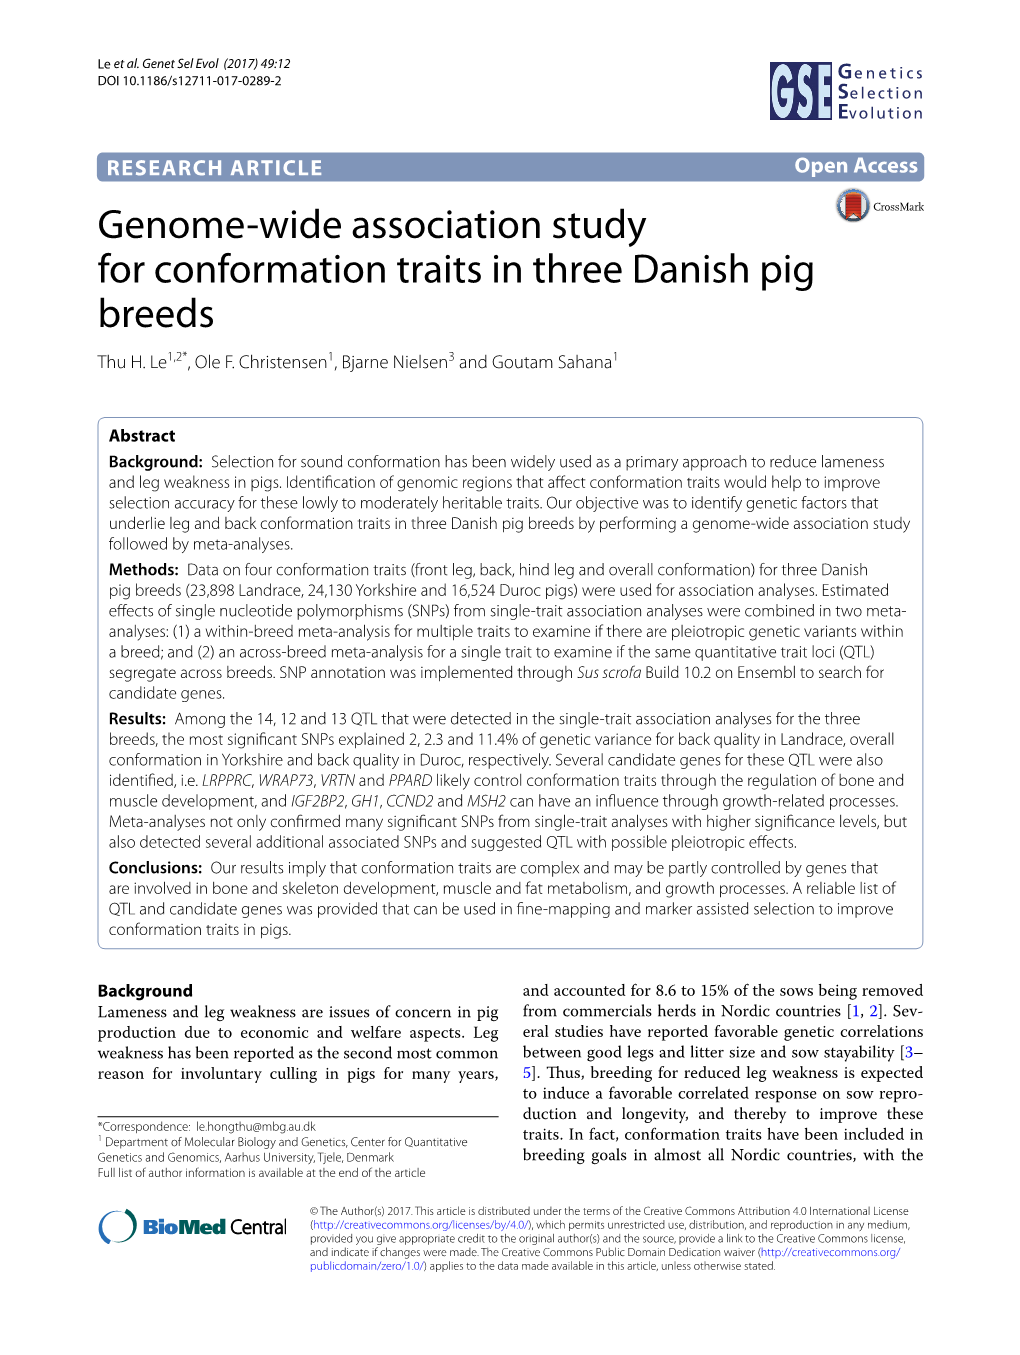 Genome-Wide Association Study for Conformation Traits in Three Danish